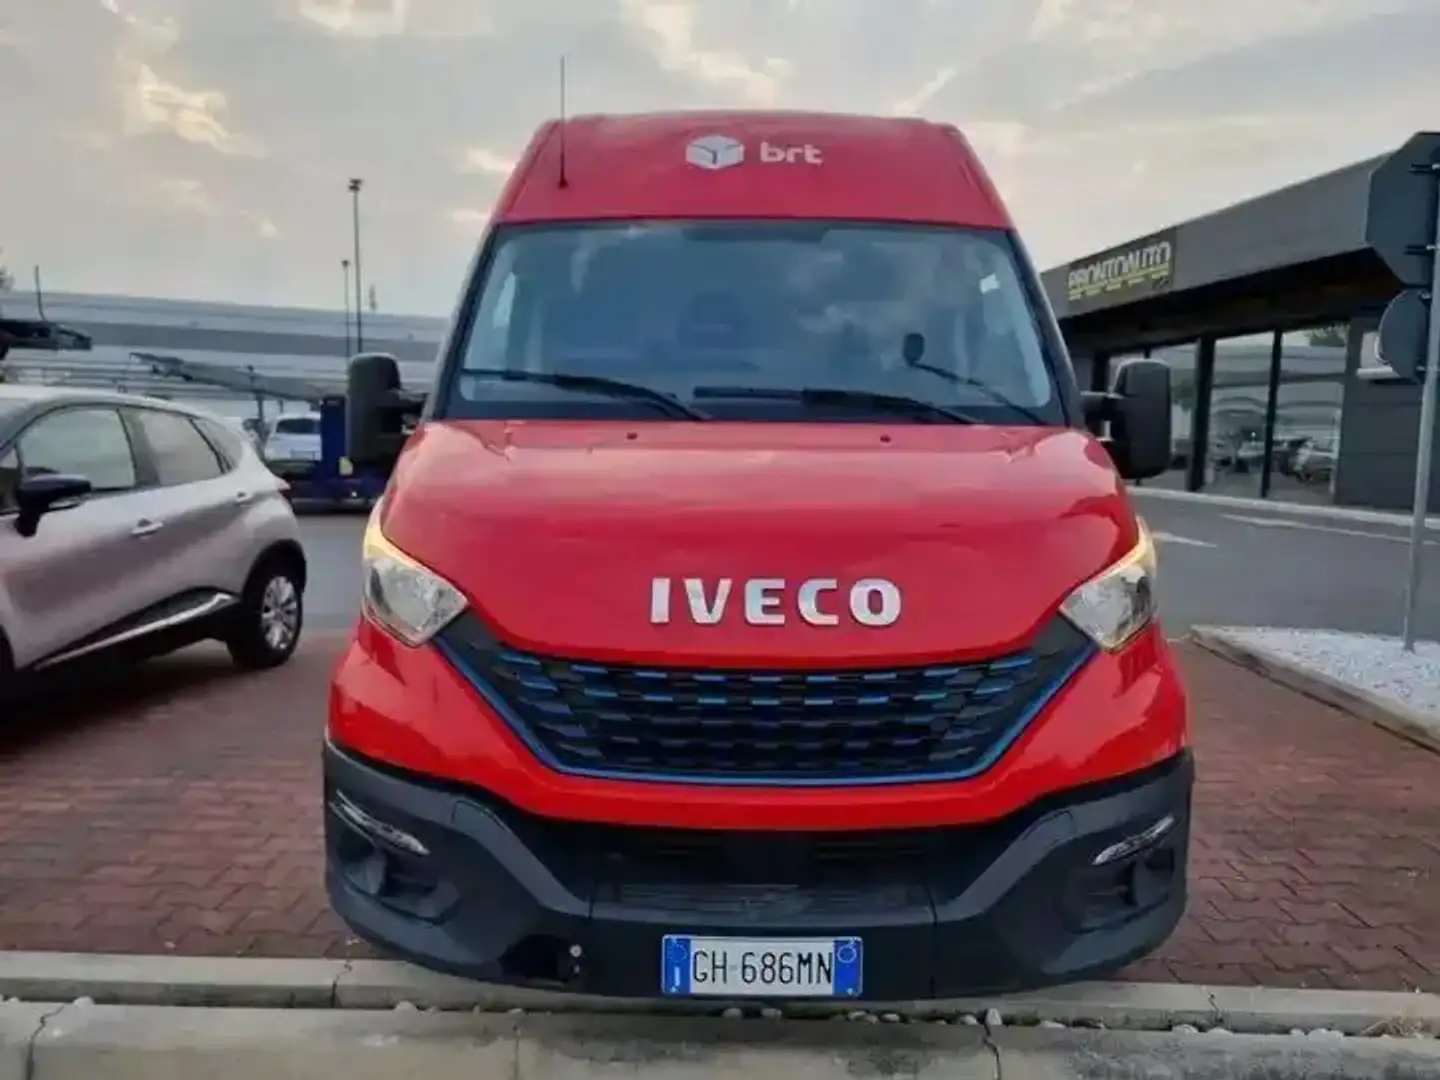 Iveco Daily 35S14NV 3.0 NATURAL POWER PM-SL-TM  TG : GH686MN Rojo - 2